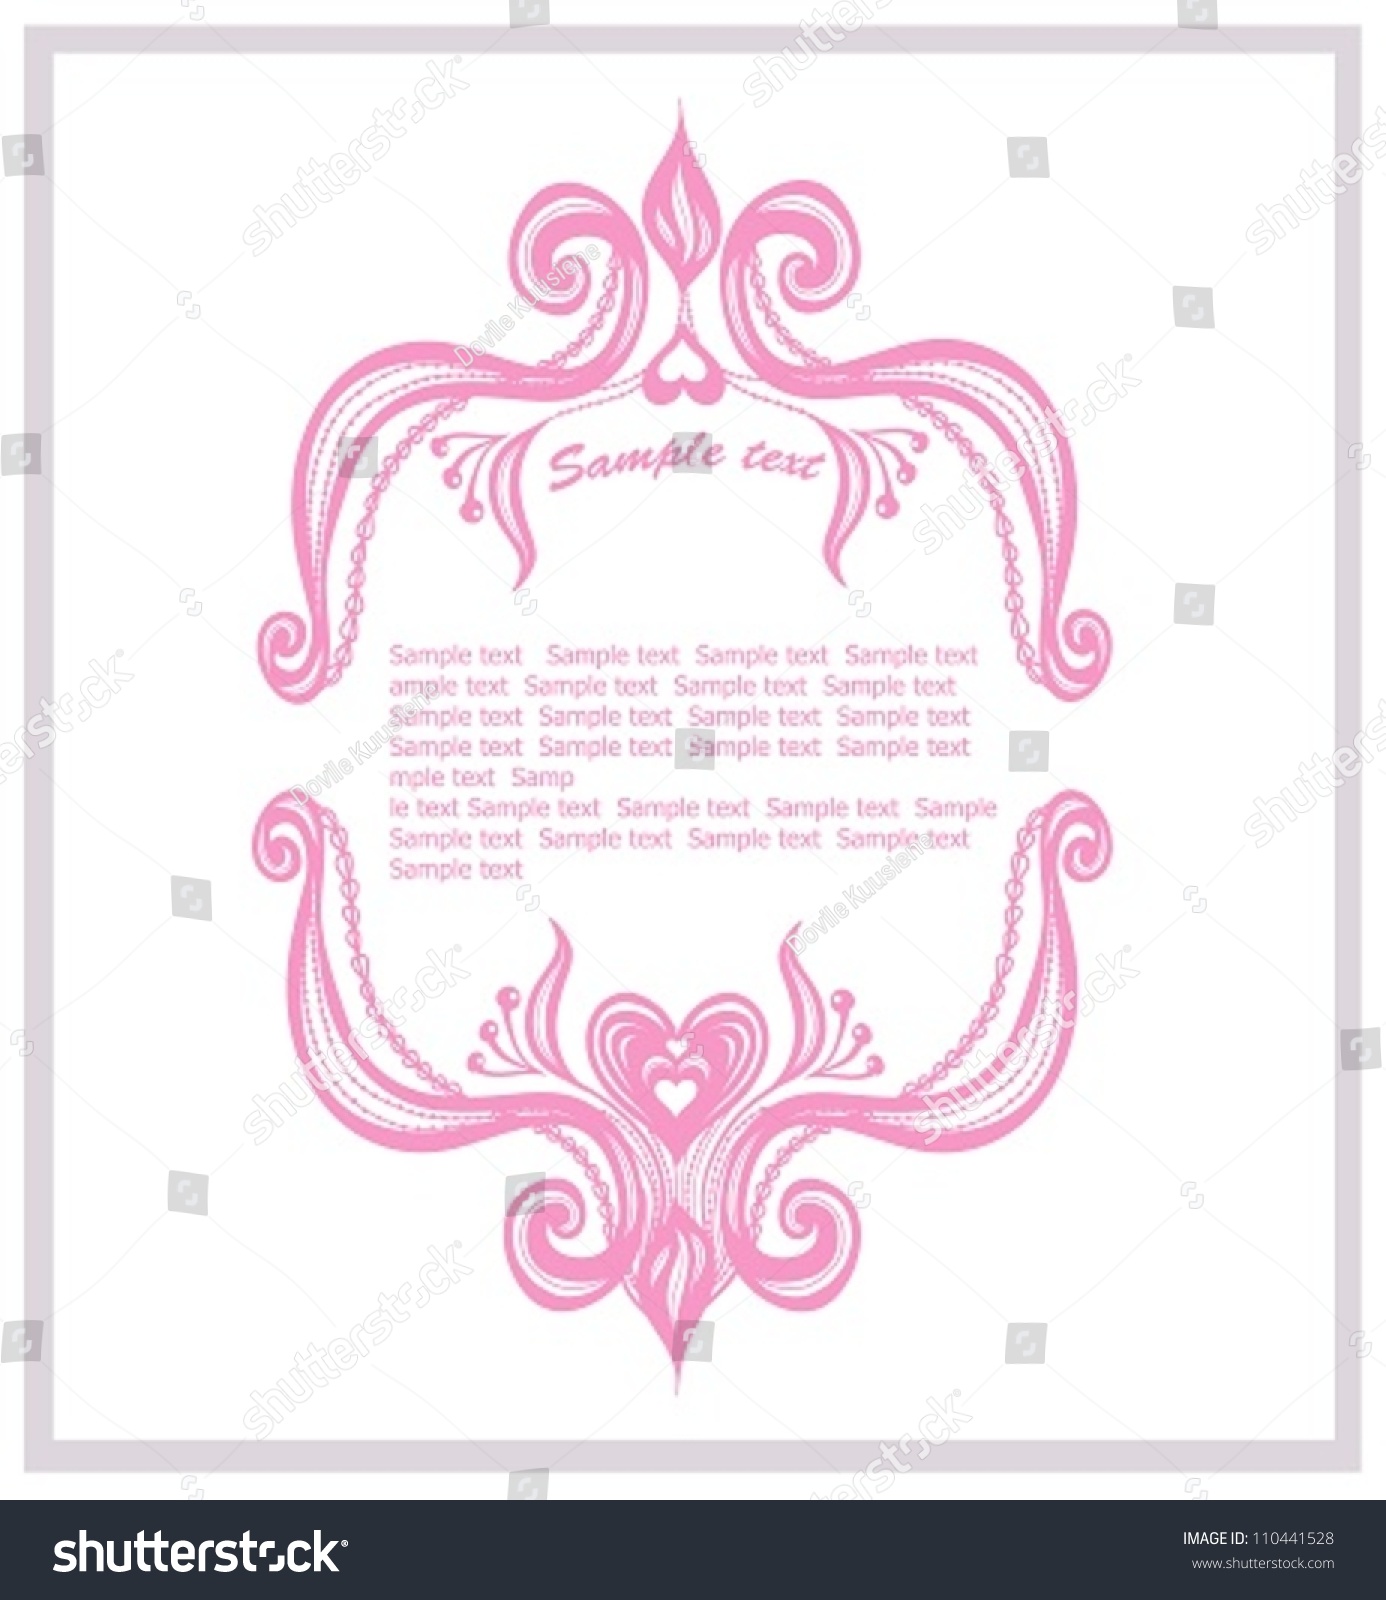 Invitation Template With Floral Elements. Abstract Border Or Frame